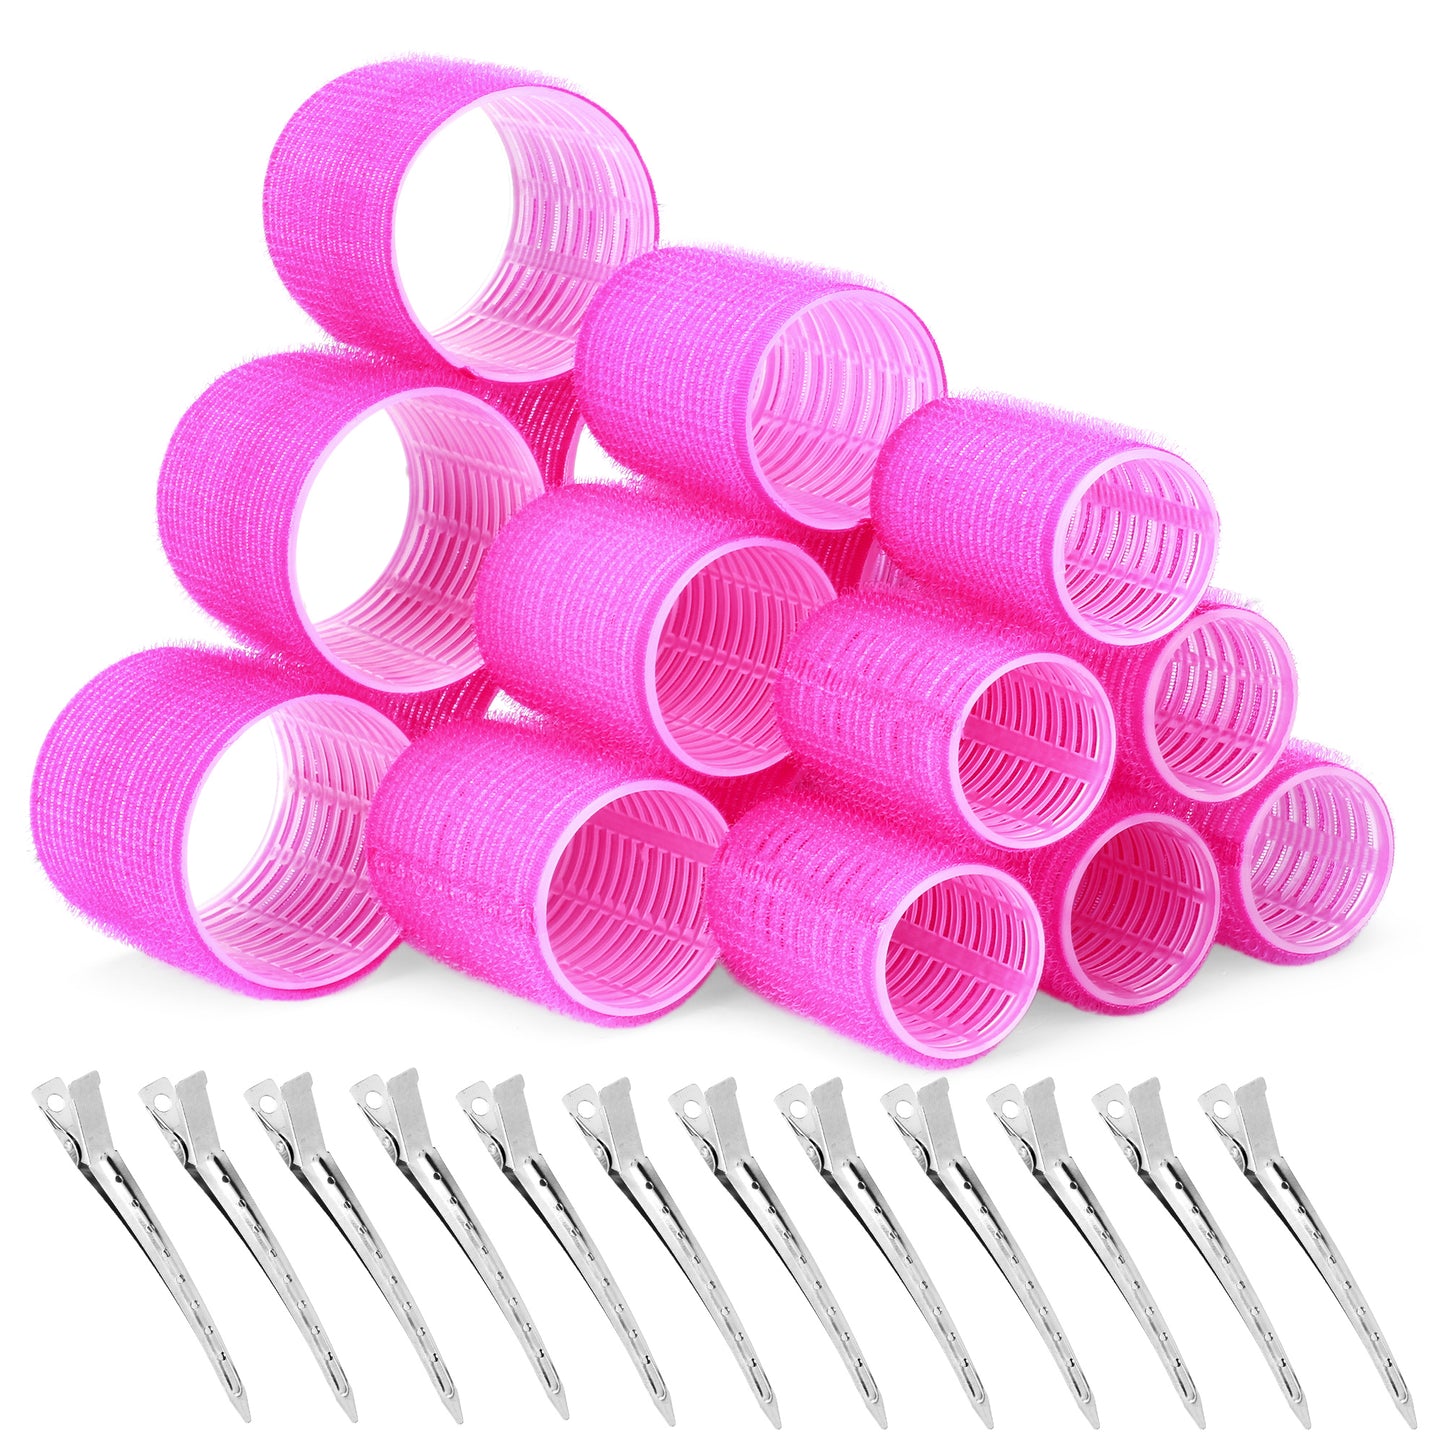 Create beautiful curls without heat or chemical damage. This set includes 18 hair curlers and 12 hair clips for various styles.